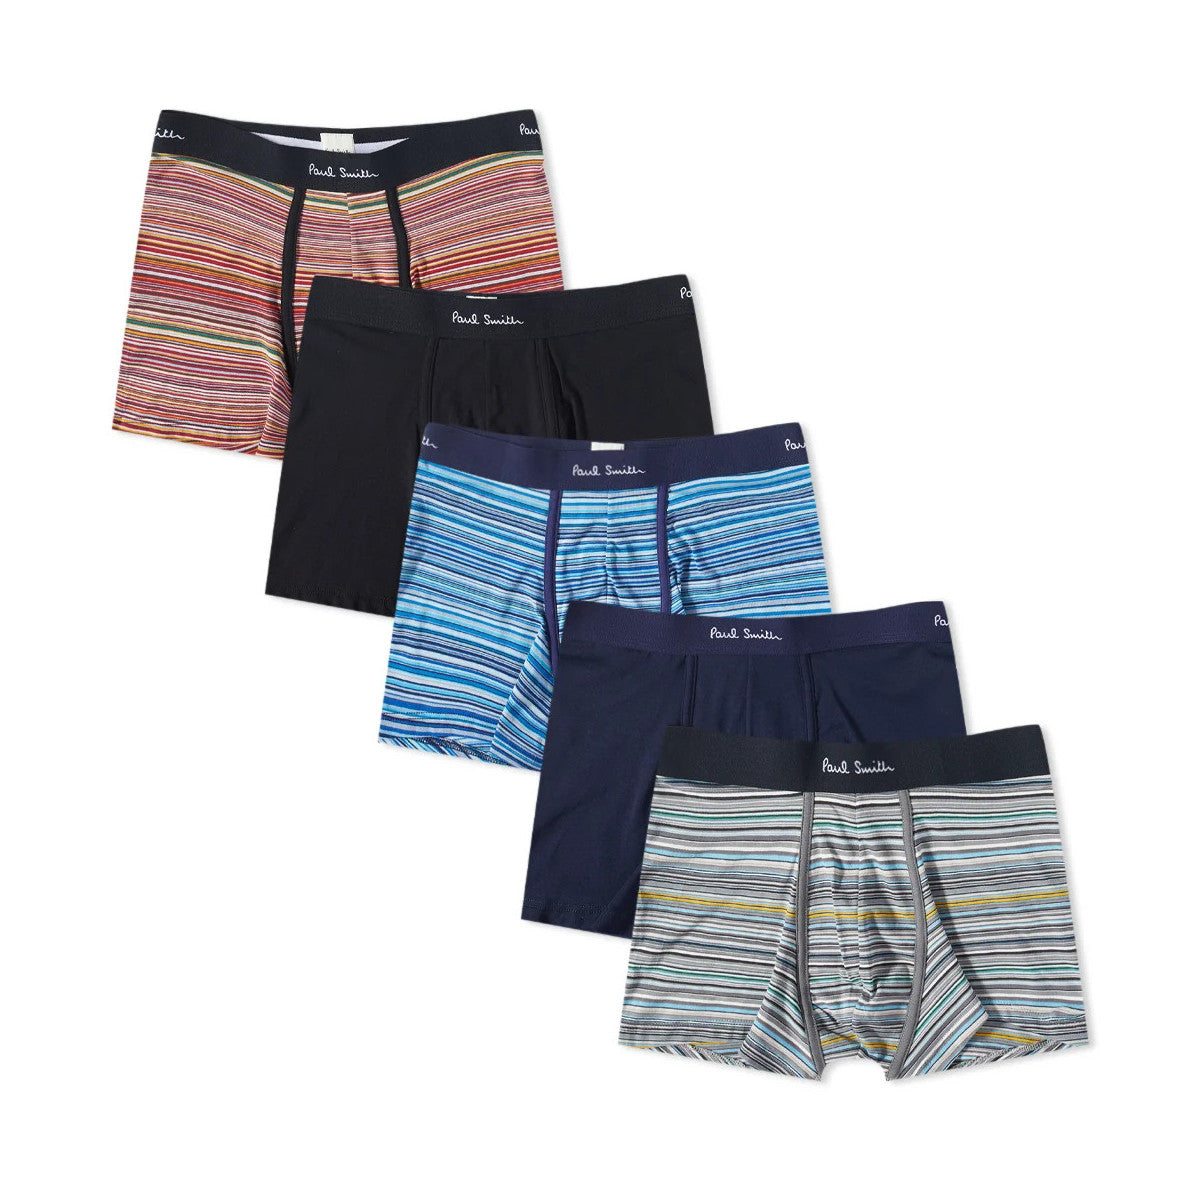 PS Paul Smith Navy Trunk 5 Pack  47 NAVY